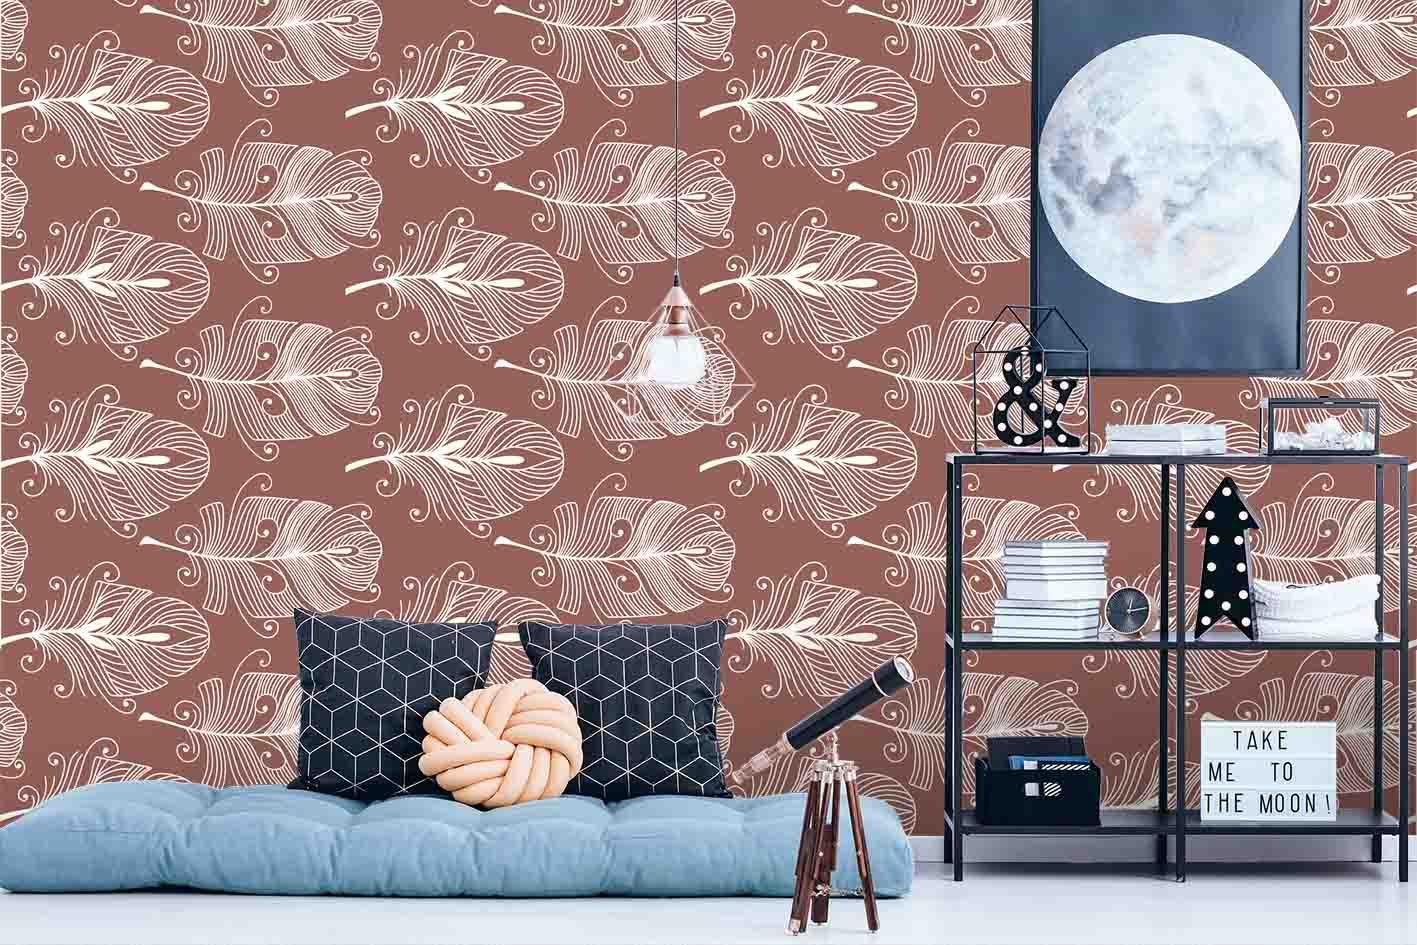 3D Vintage Feathers Wall Mural Wallpaper SF122- Jess Art Decoration